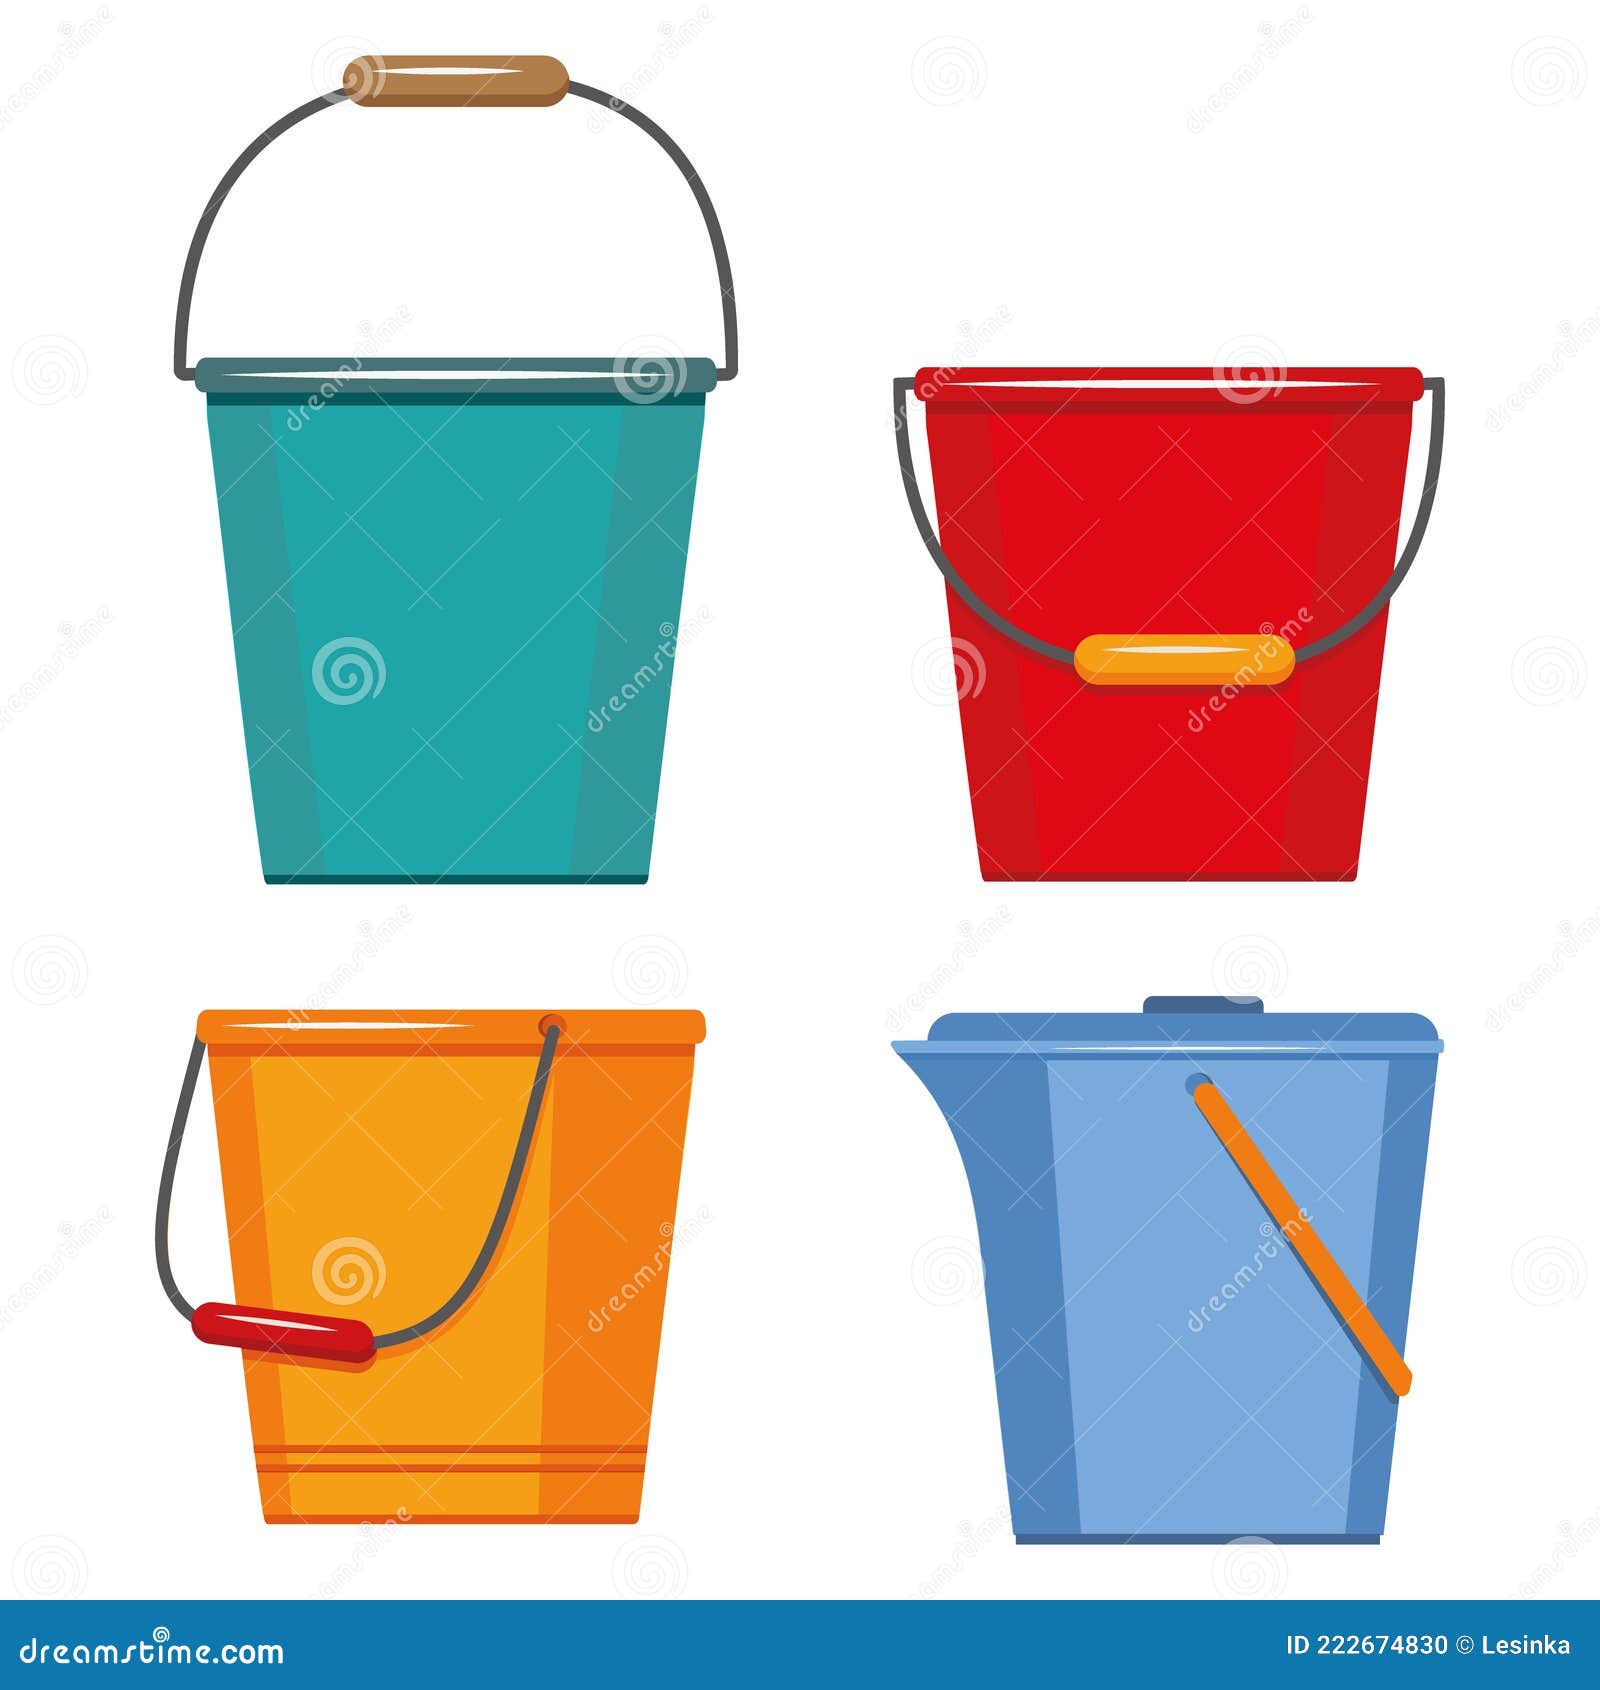 https://thumbs.dreamstime.com/z/set-insulated-containers-washing-cleaning-made-plastic-basins-bucket-bath-vector-flat-style-222674830.jpg